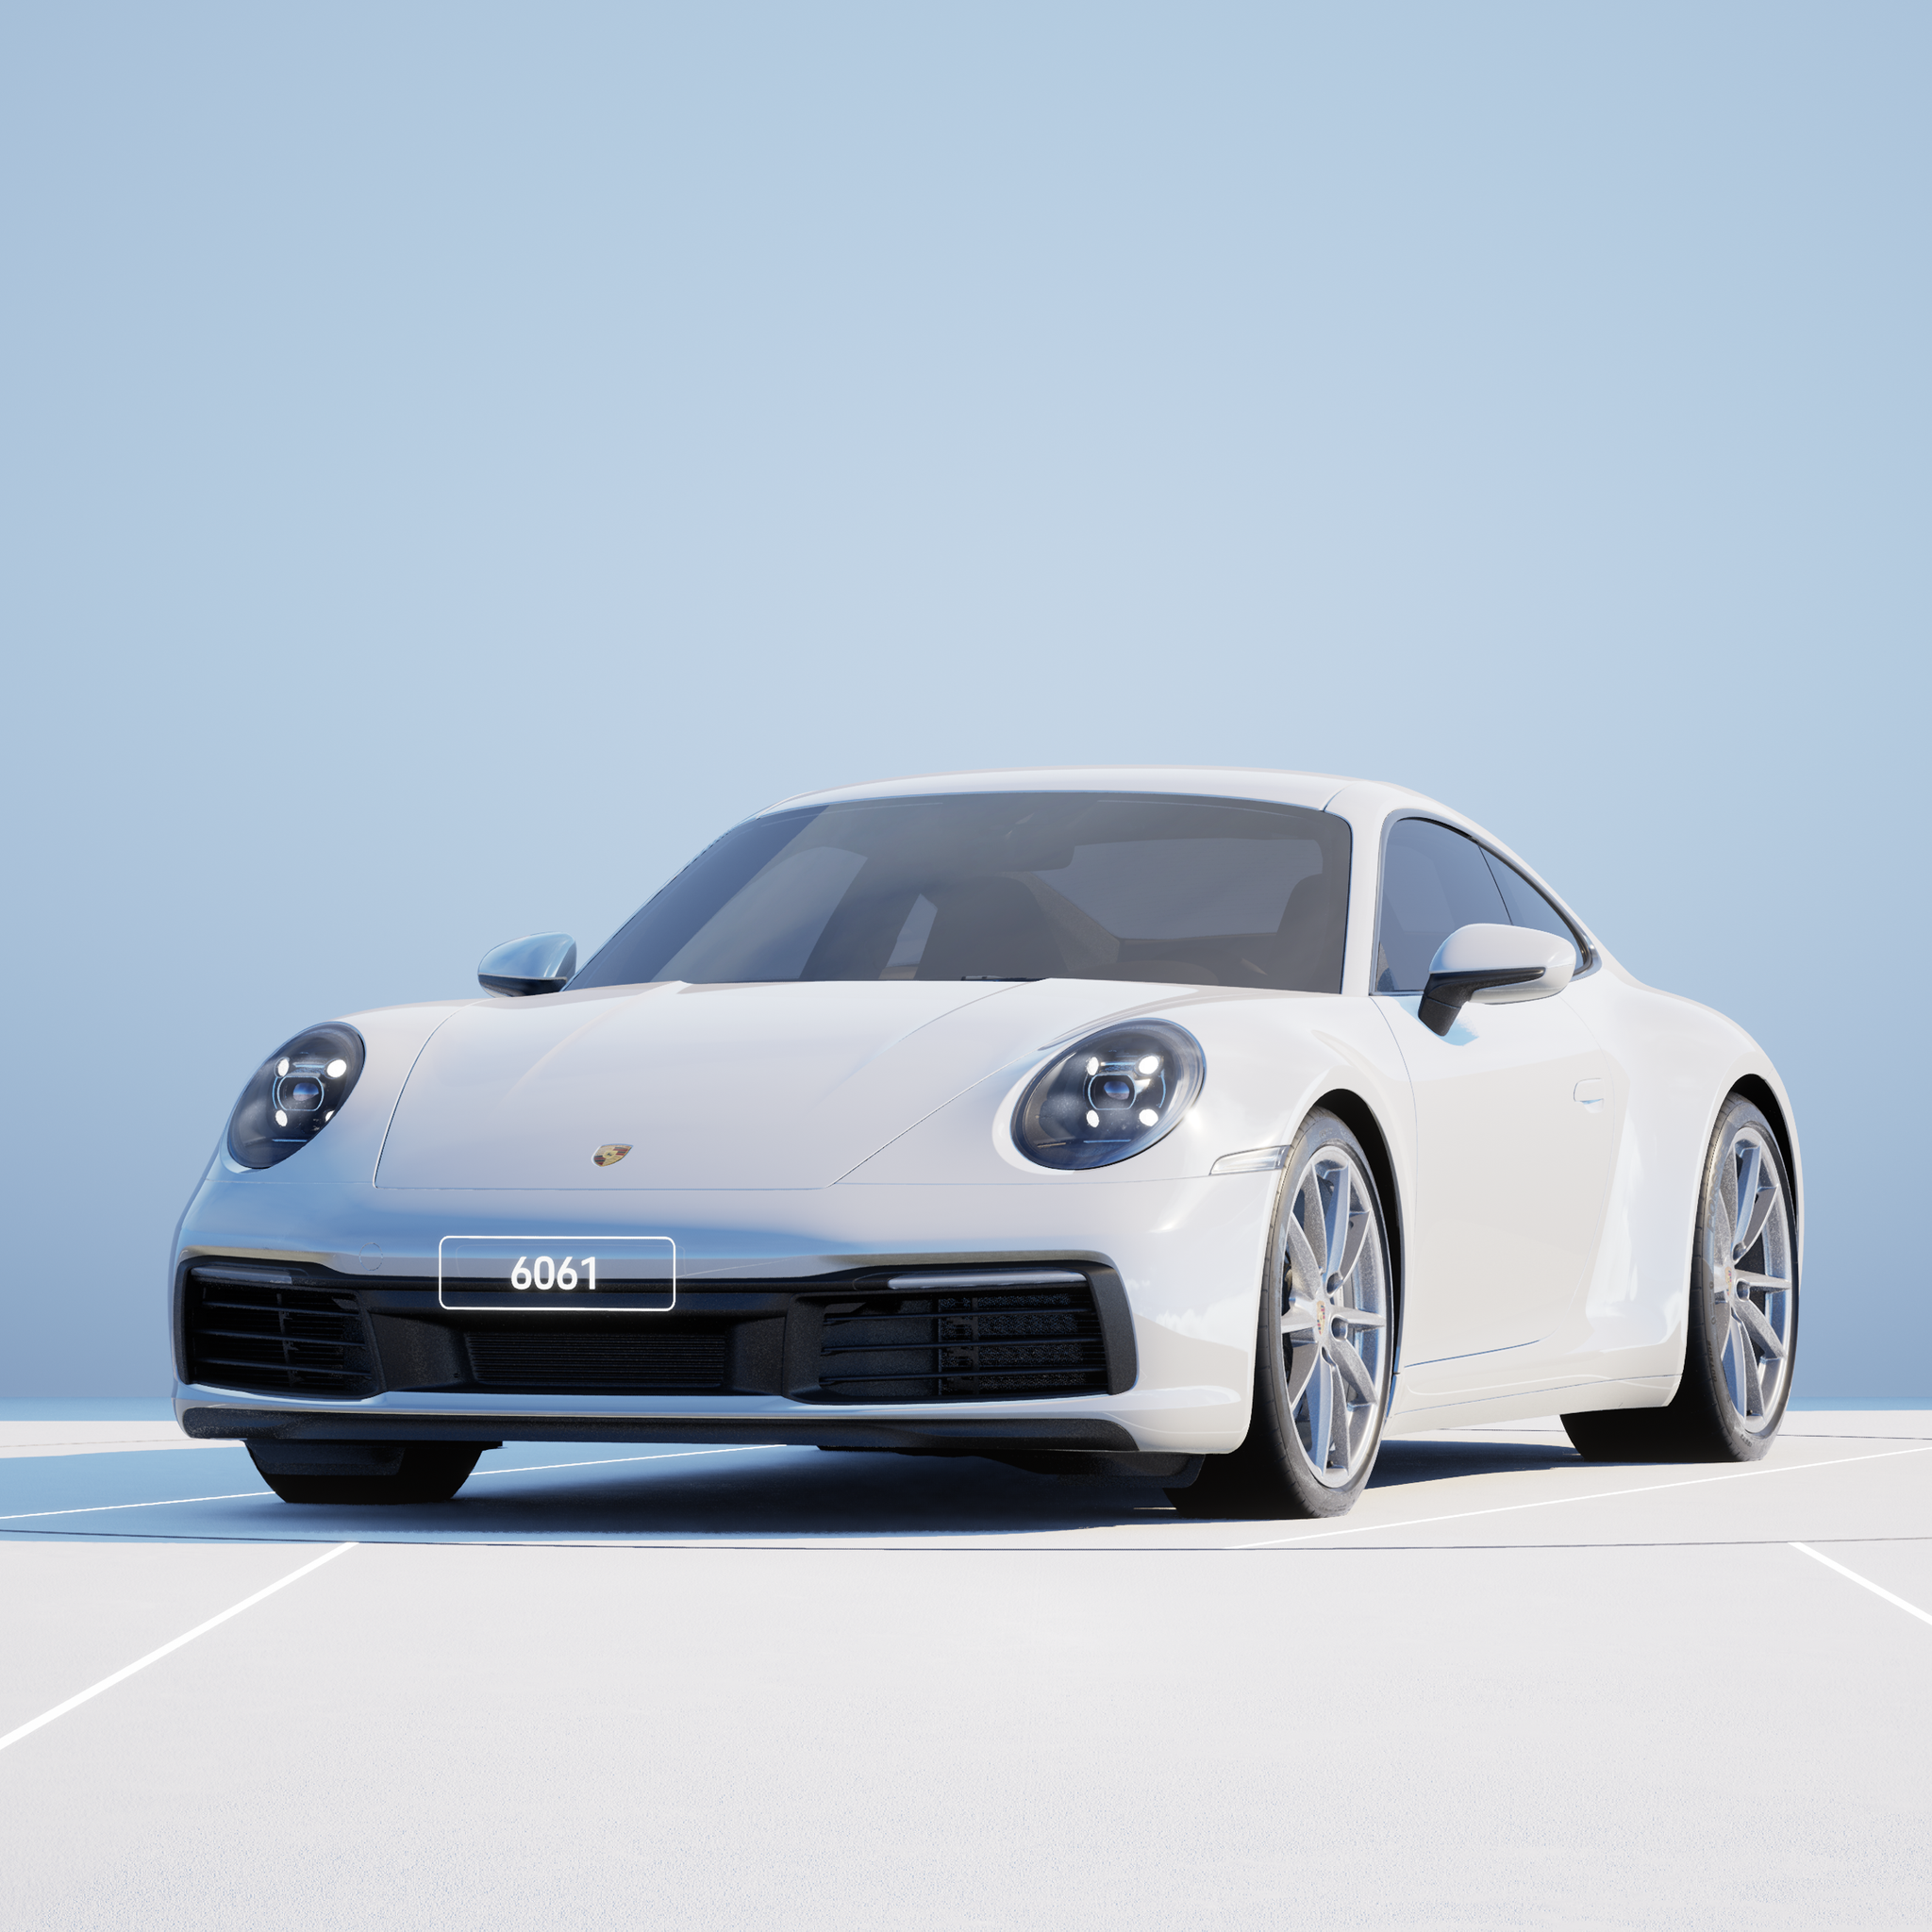 The PORSCHΞ 911 6061 image in phase